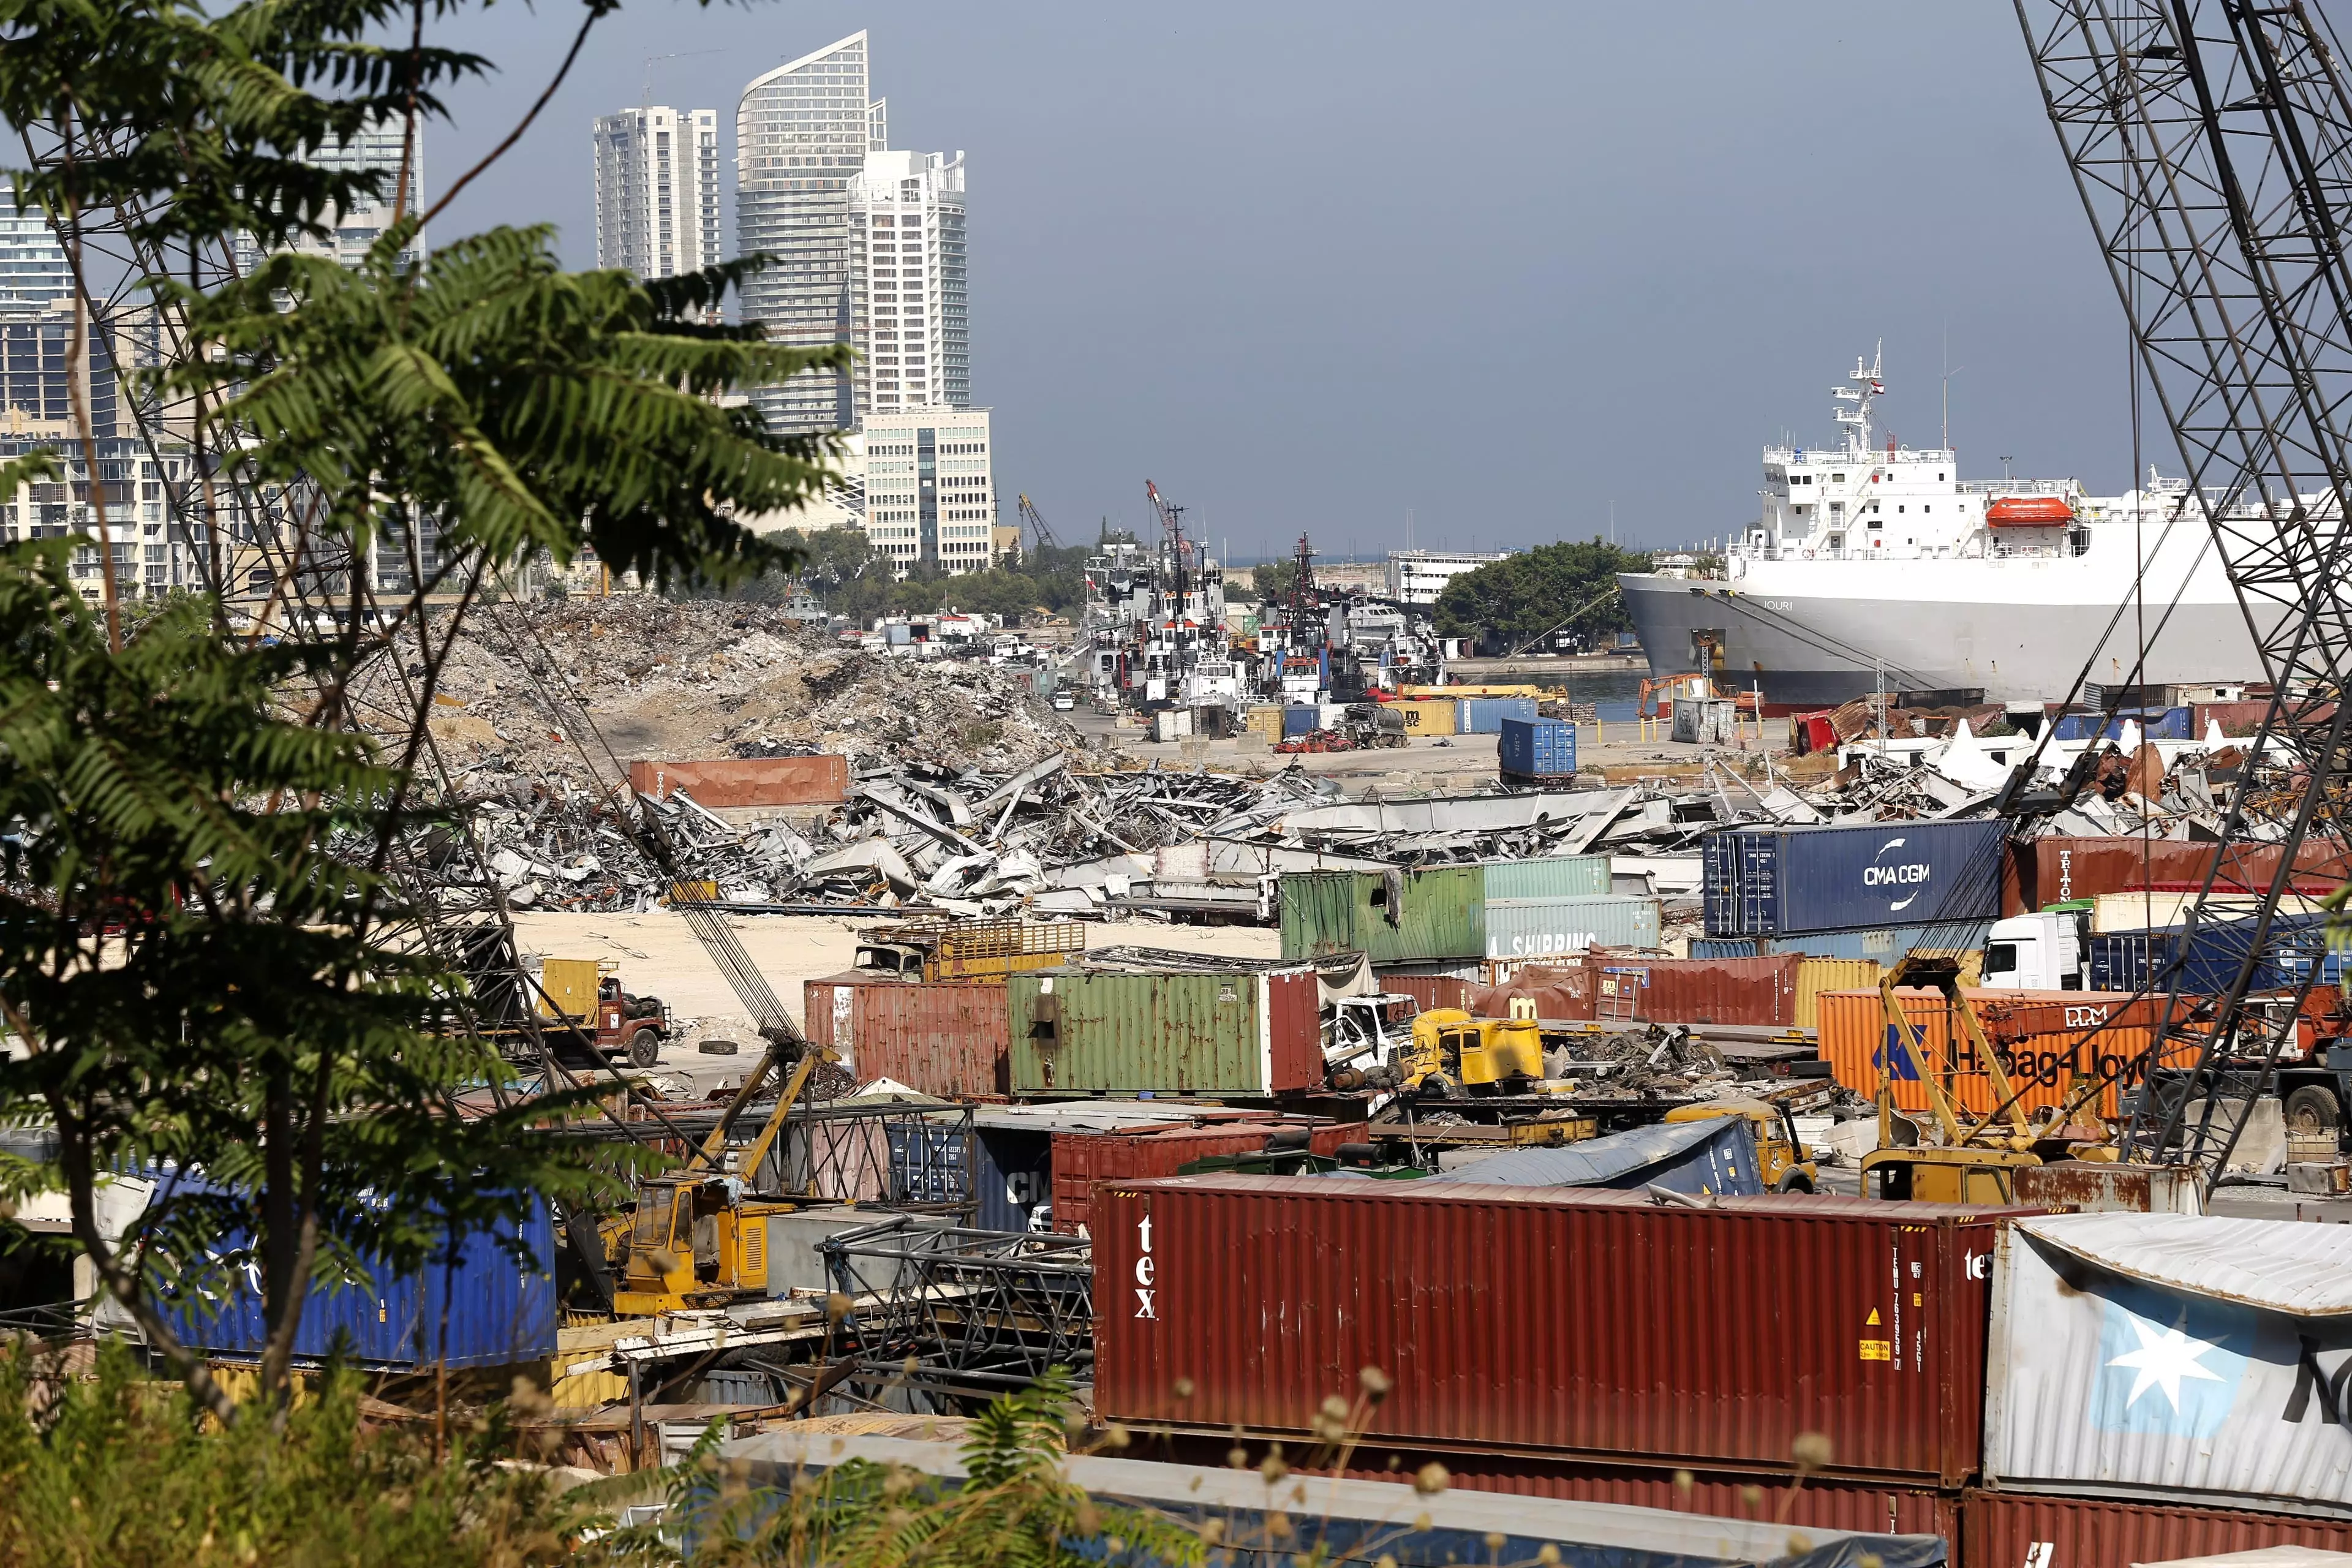 One year on from the explosion, international construction companies are bidding to reconstruct the Port of Beirut.